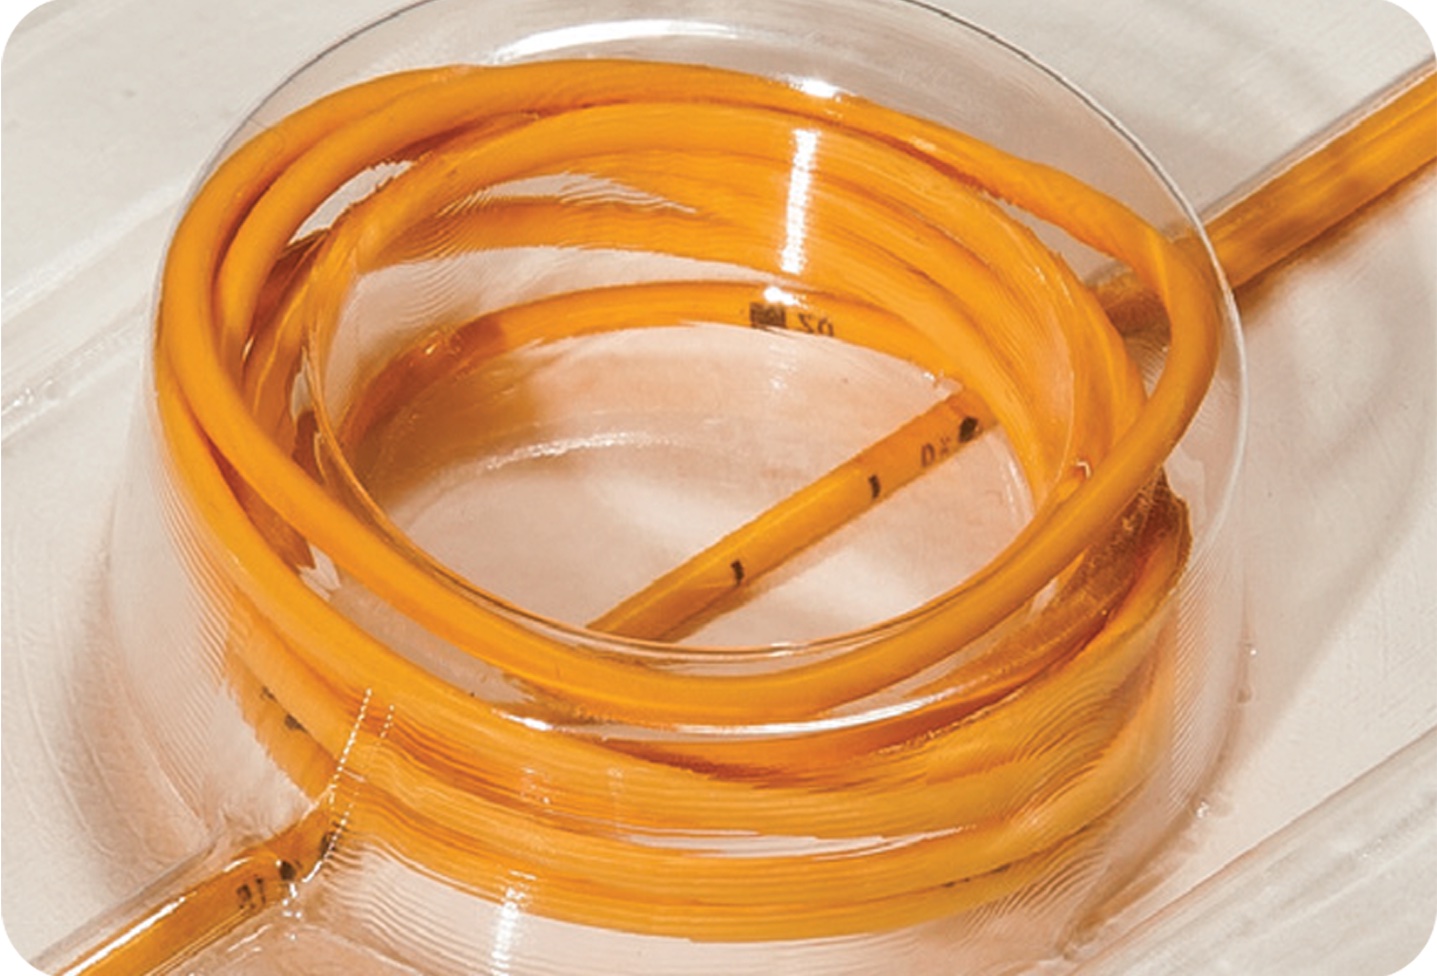 p5b - Anti Bacterial Silicon Catheters